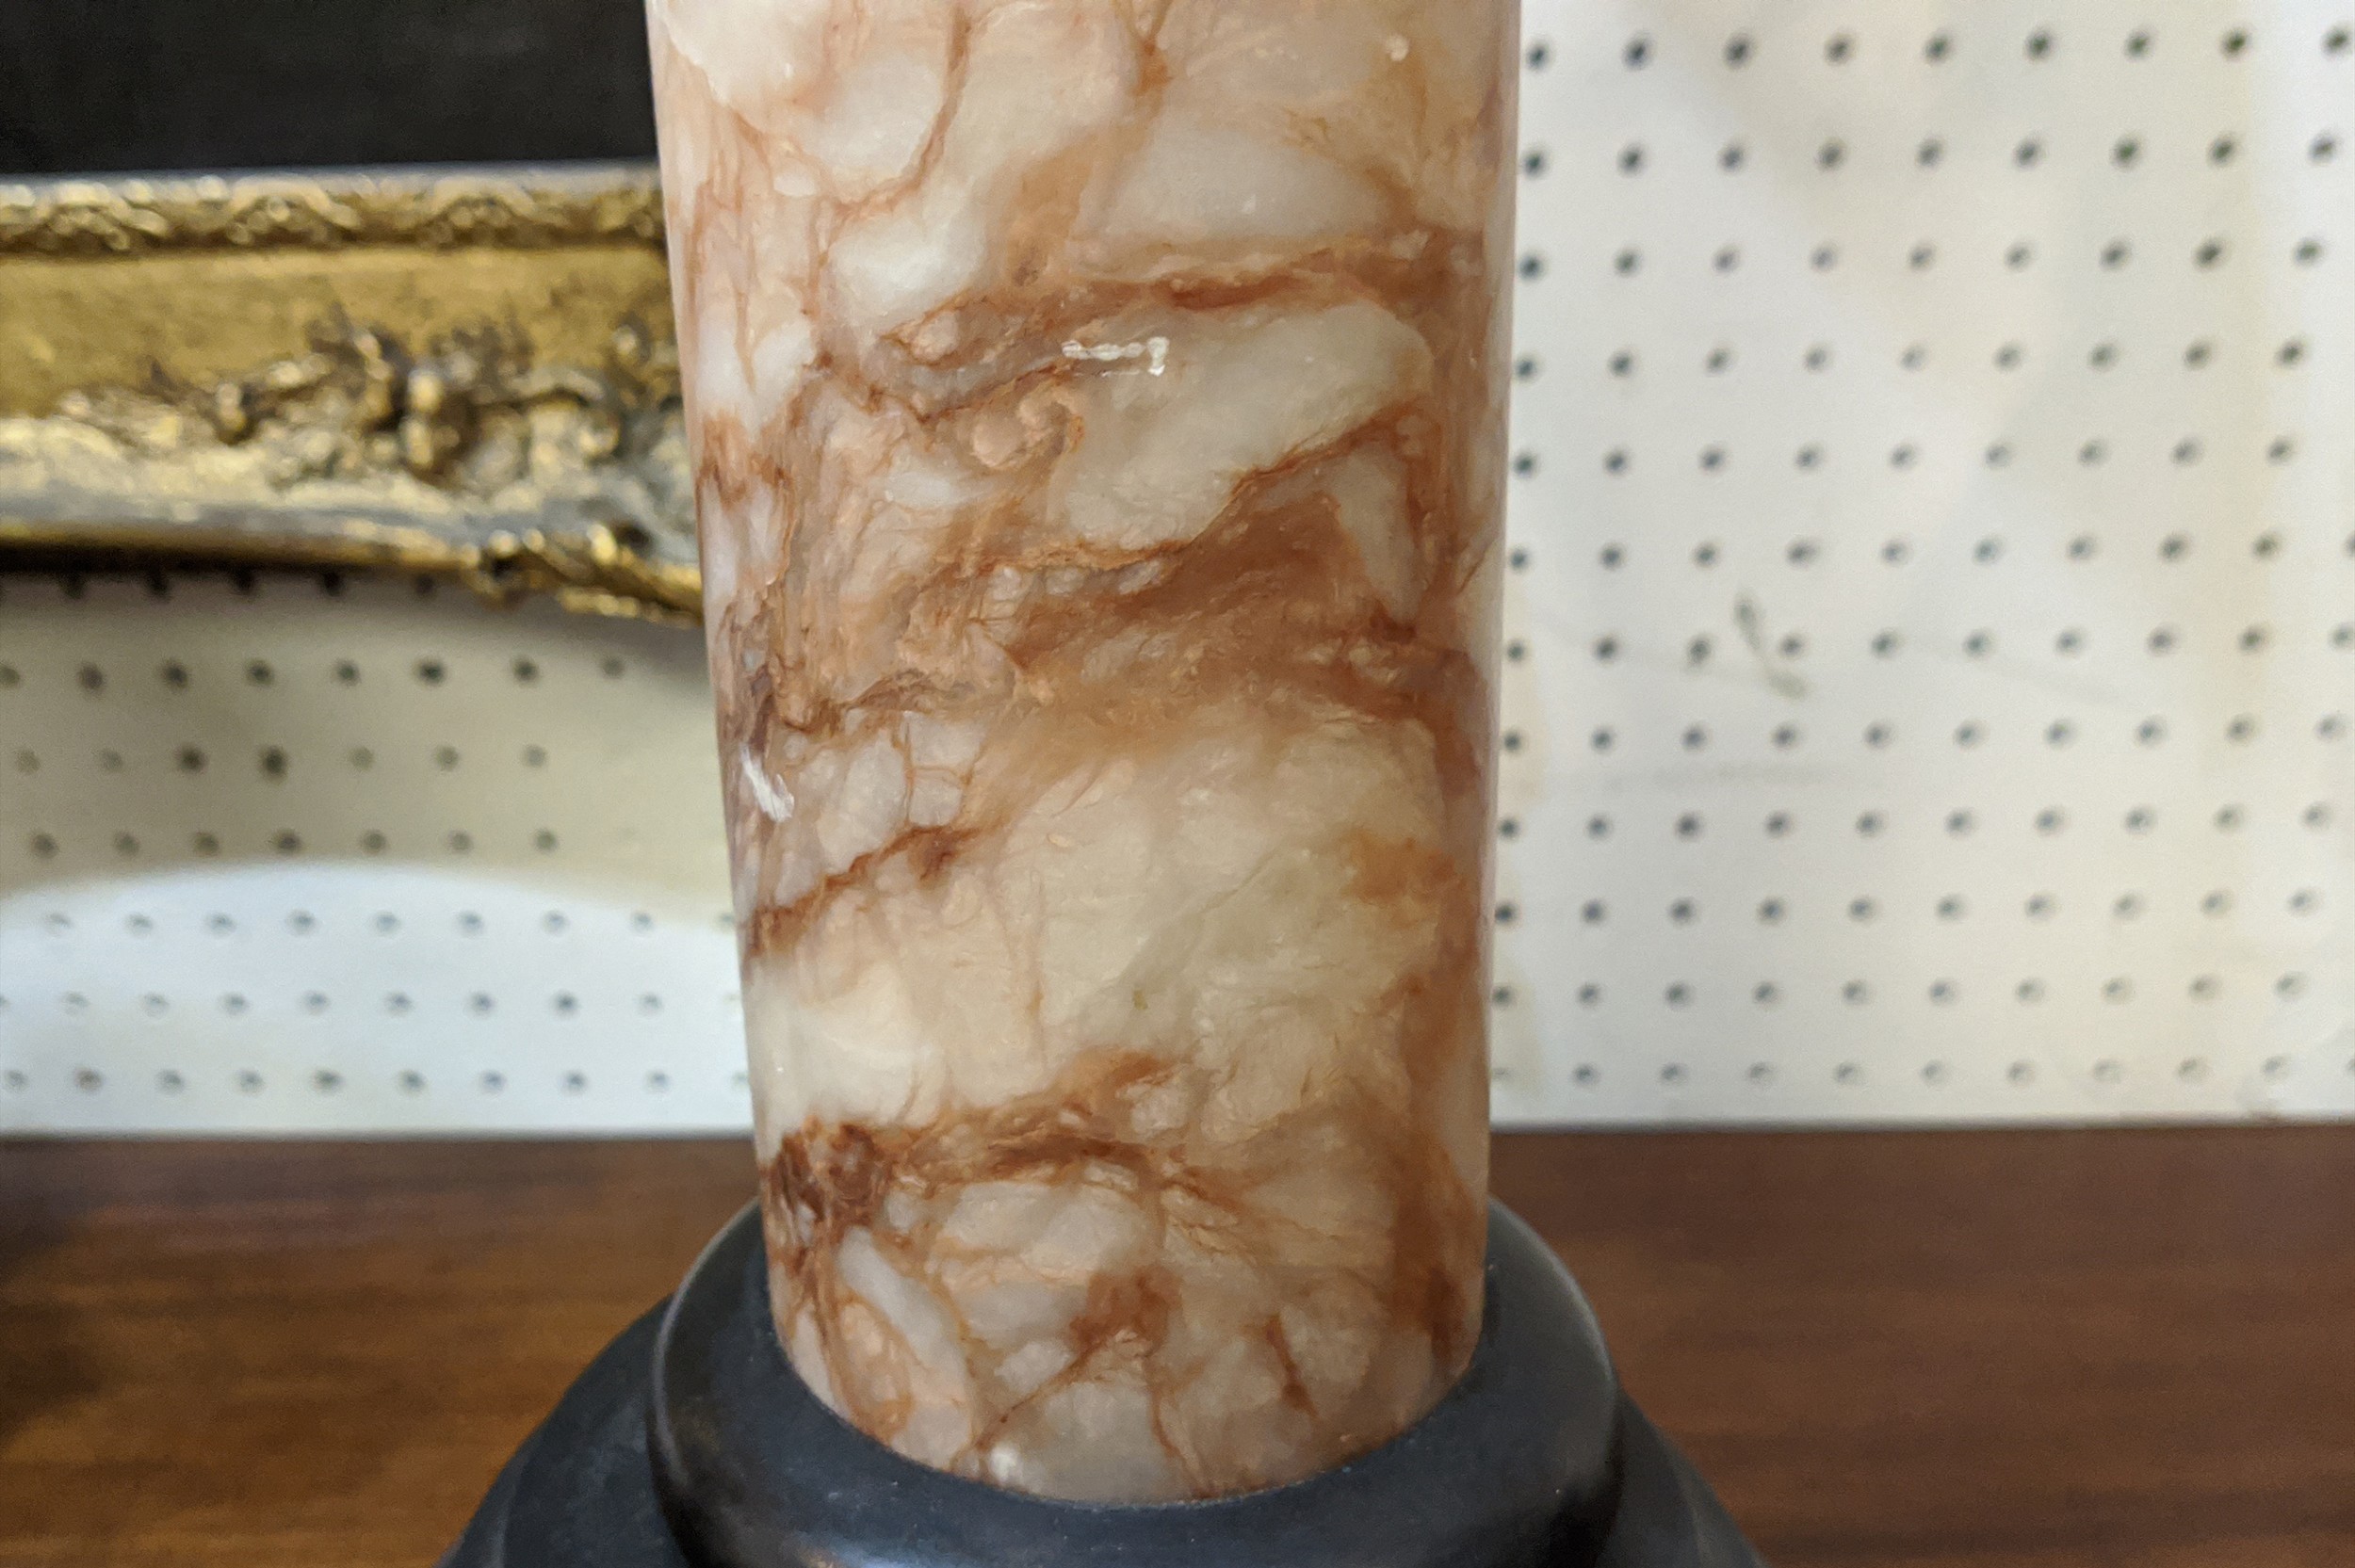 COLUMN LAMPS, a pair, circa 1920s, grand tour style alabaster column form with stepped bronze - Image 10 of 17